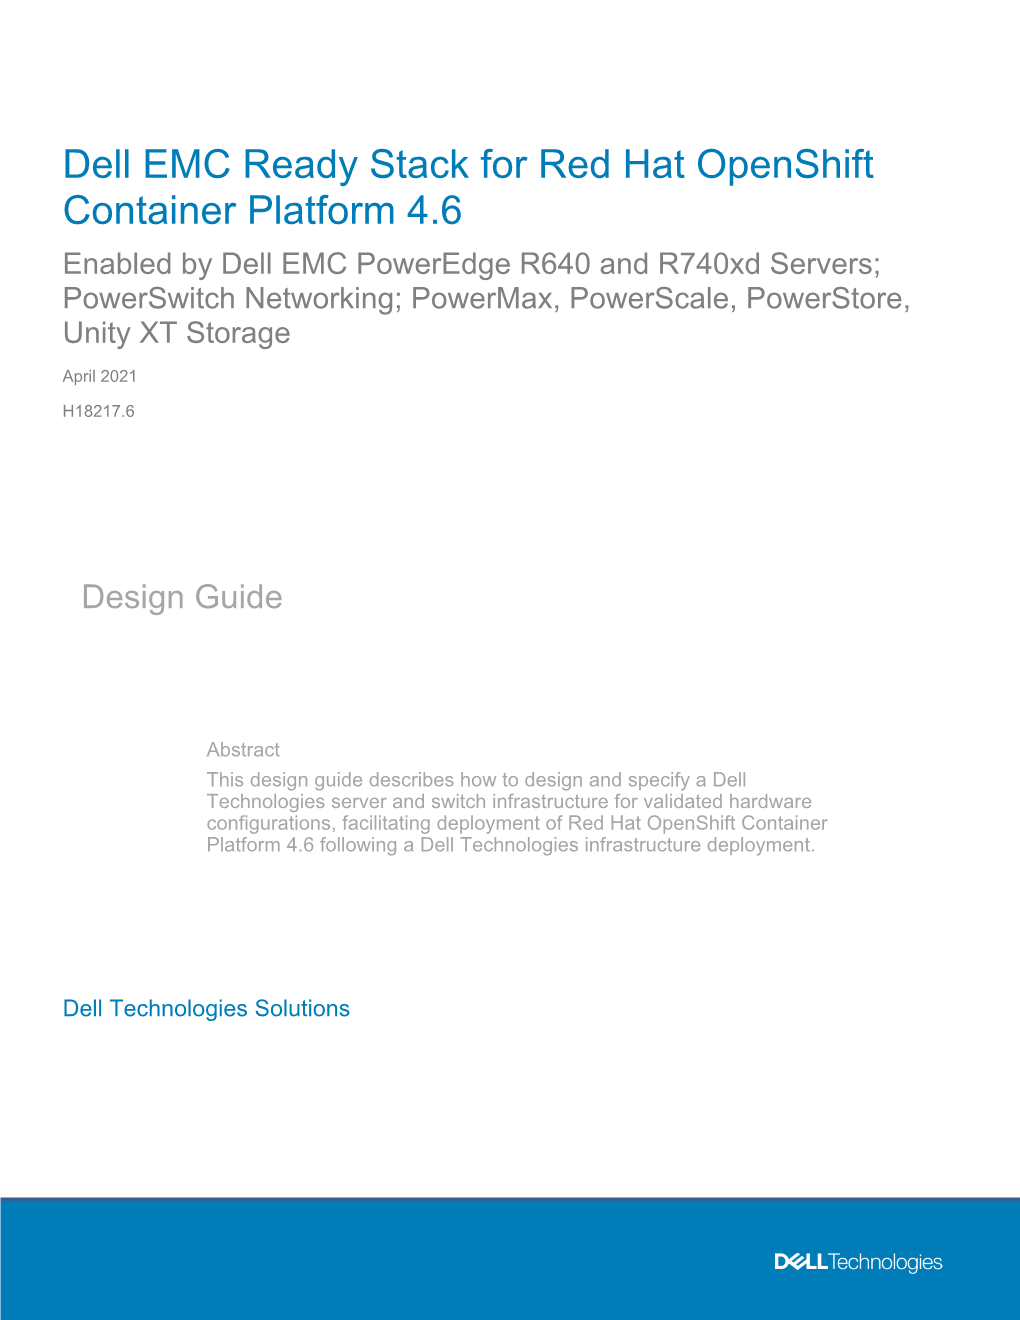 Dell EMC Ready Stack for Red Hat Openshift Container Platform